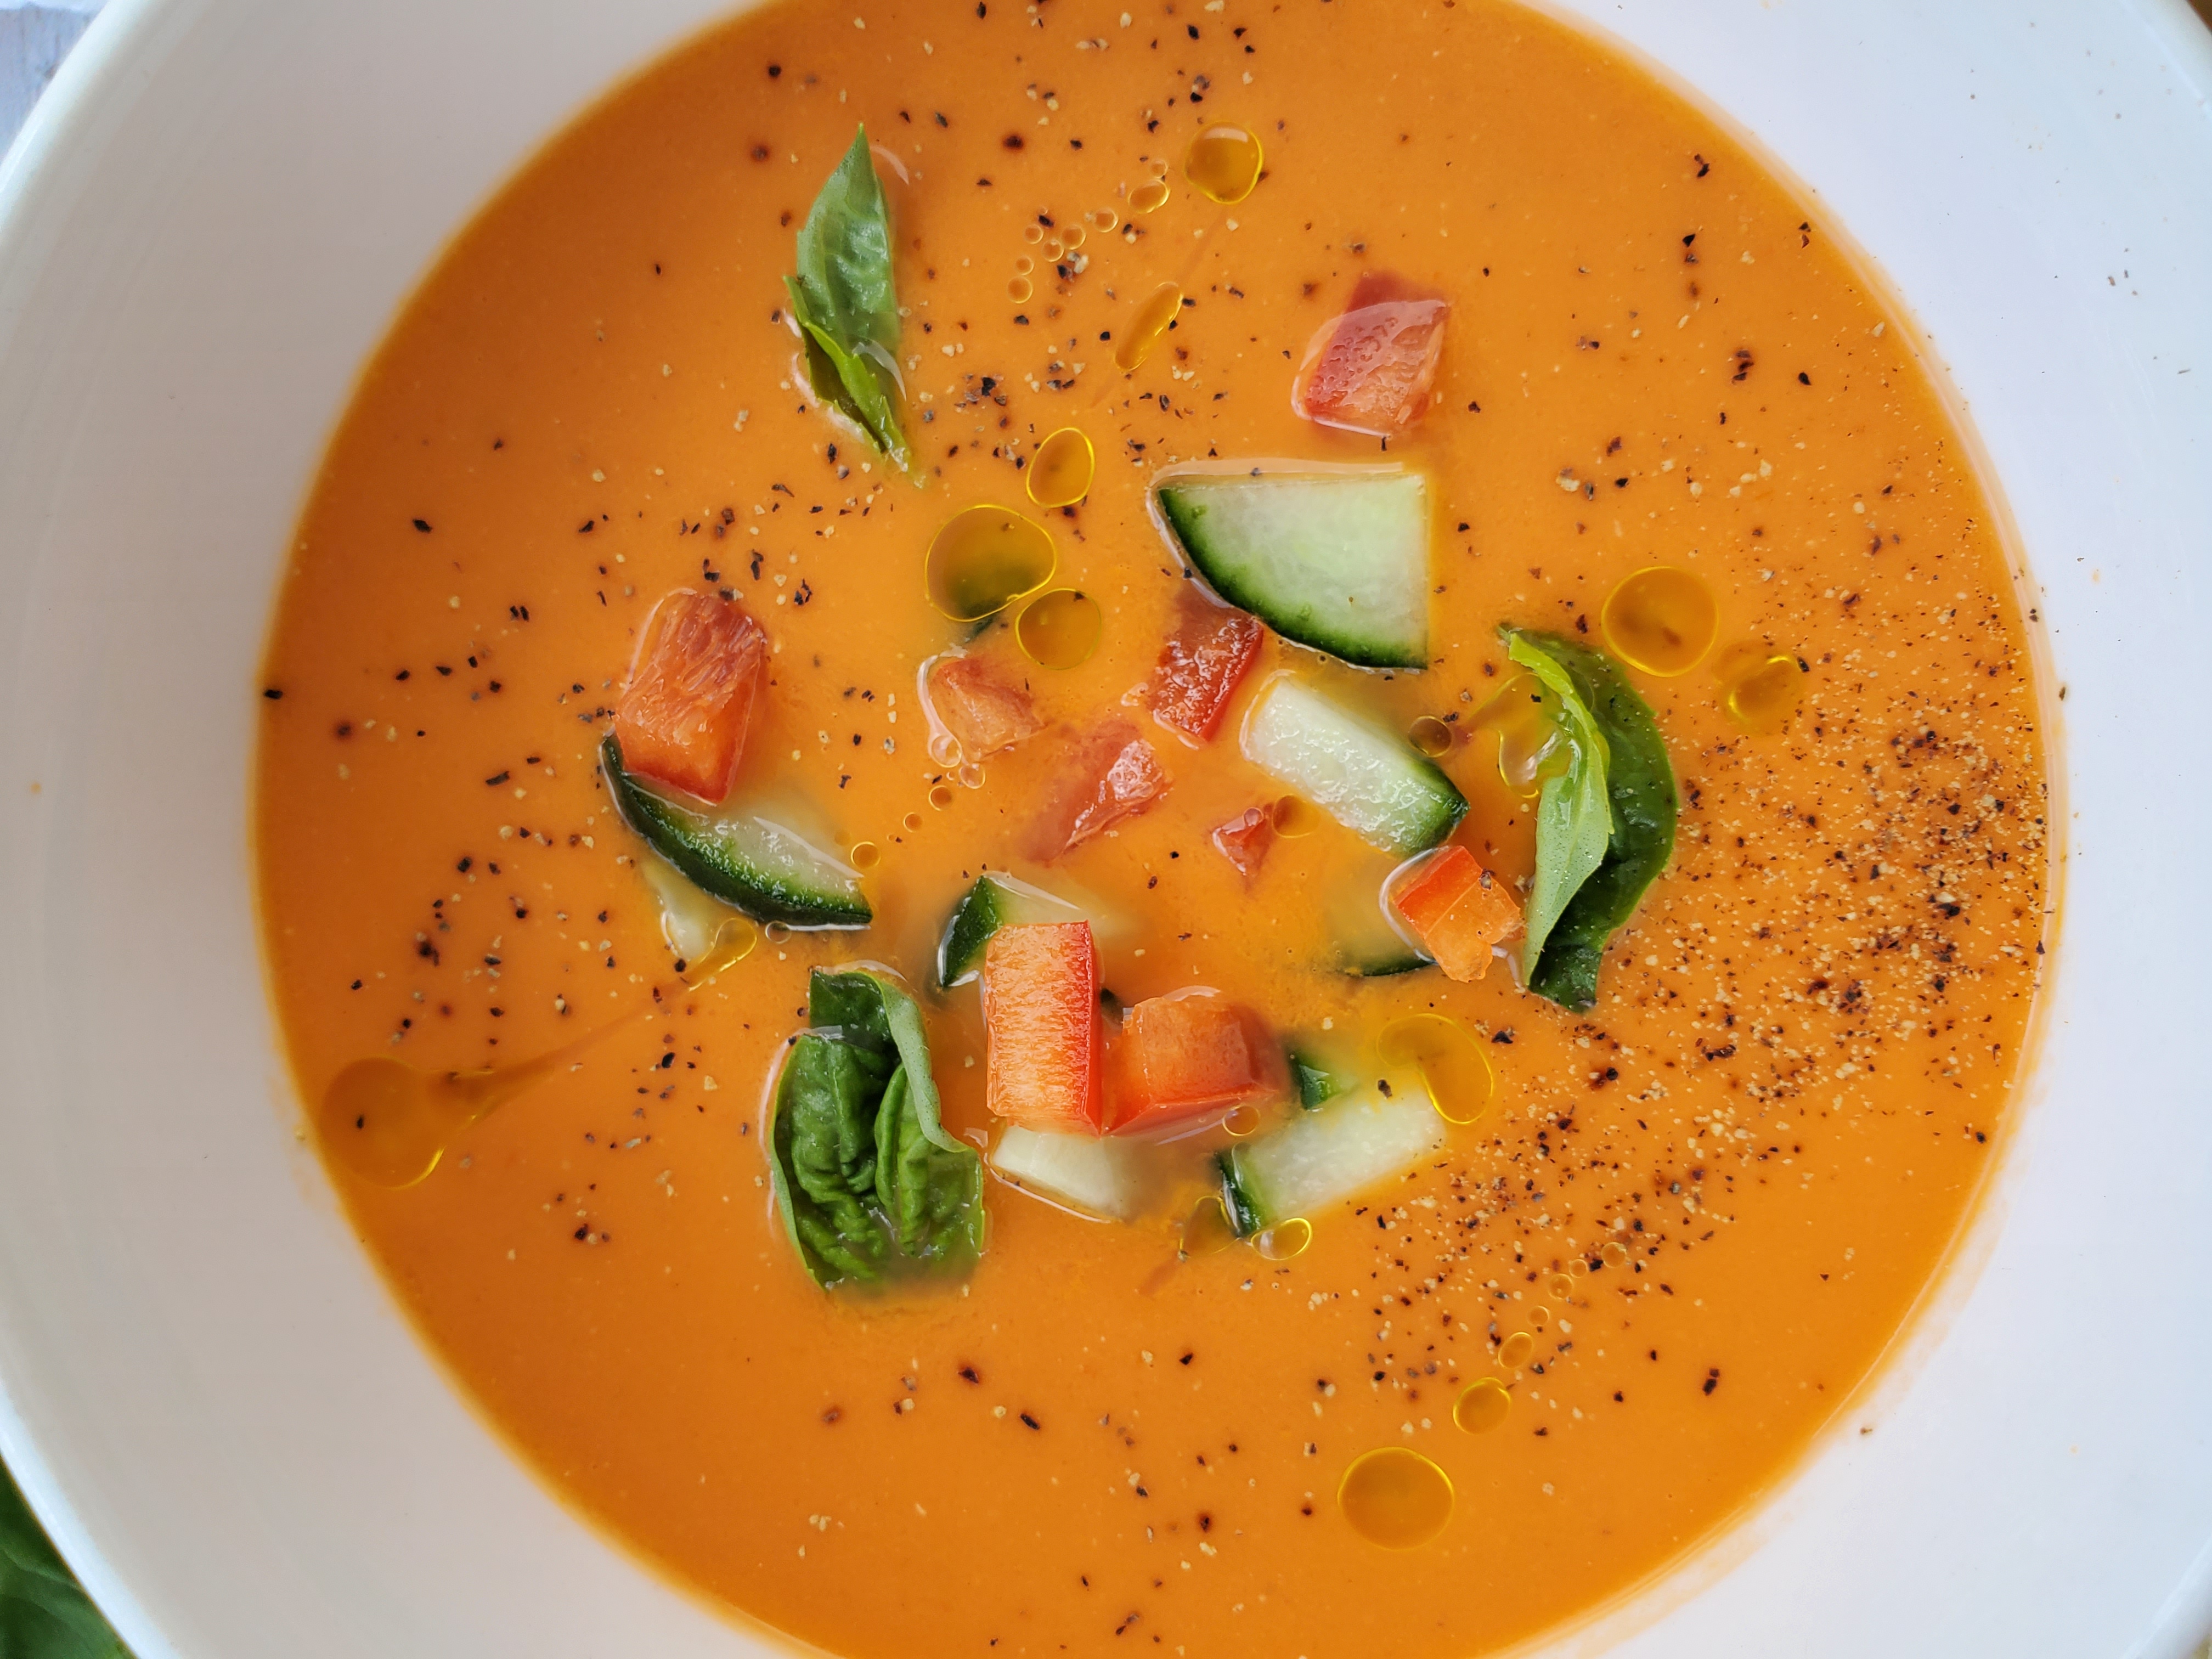 bowl of gazpacho up close and with a few pieces of cucumber, pepper, and basil sprinkled on top